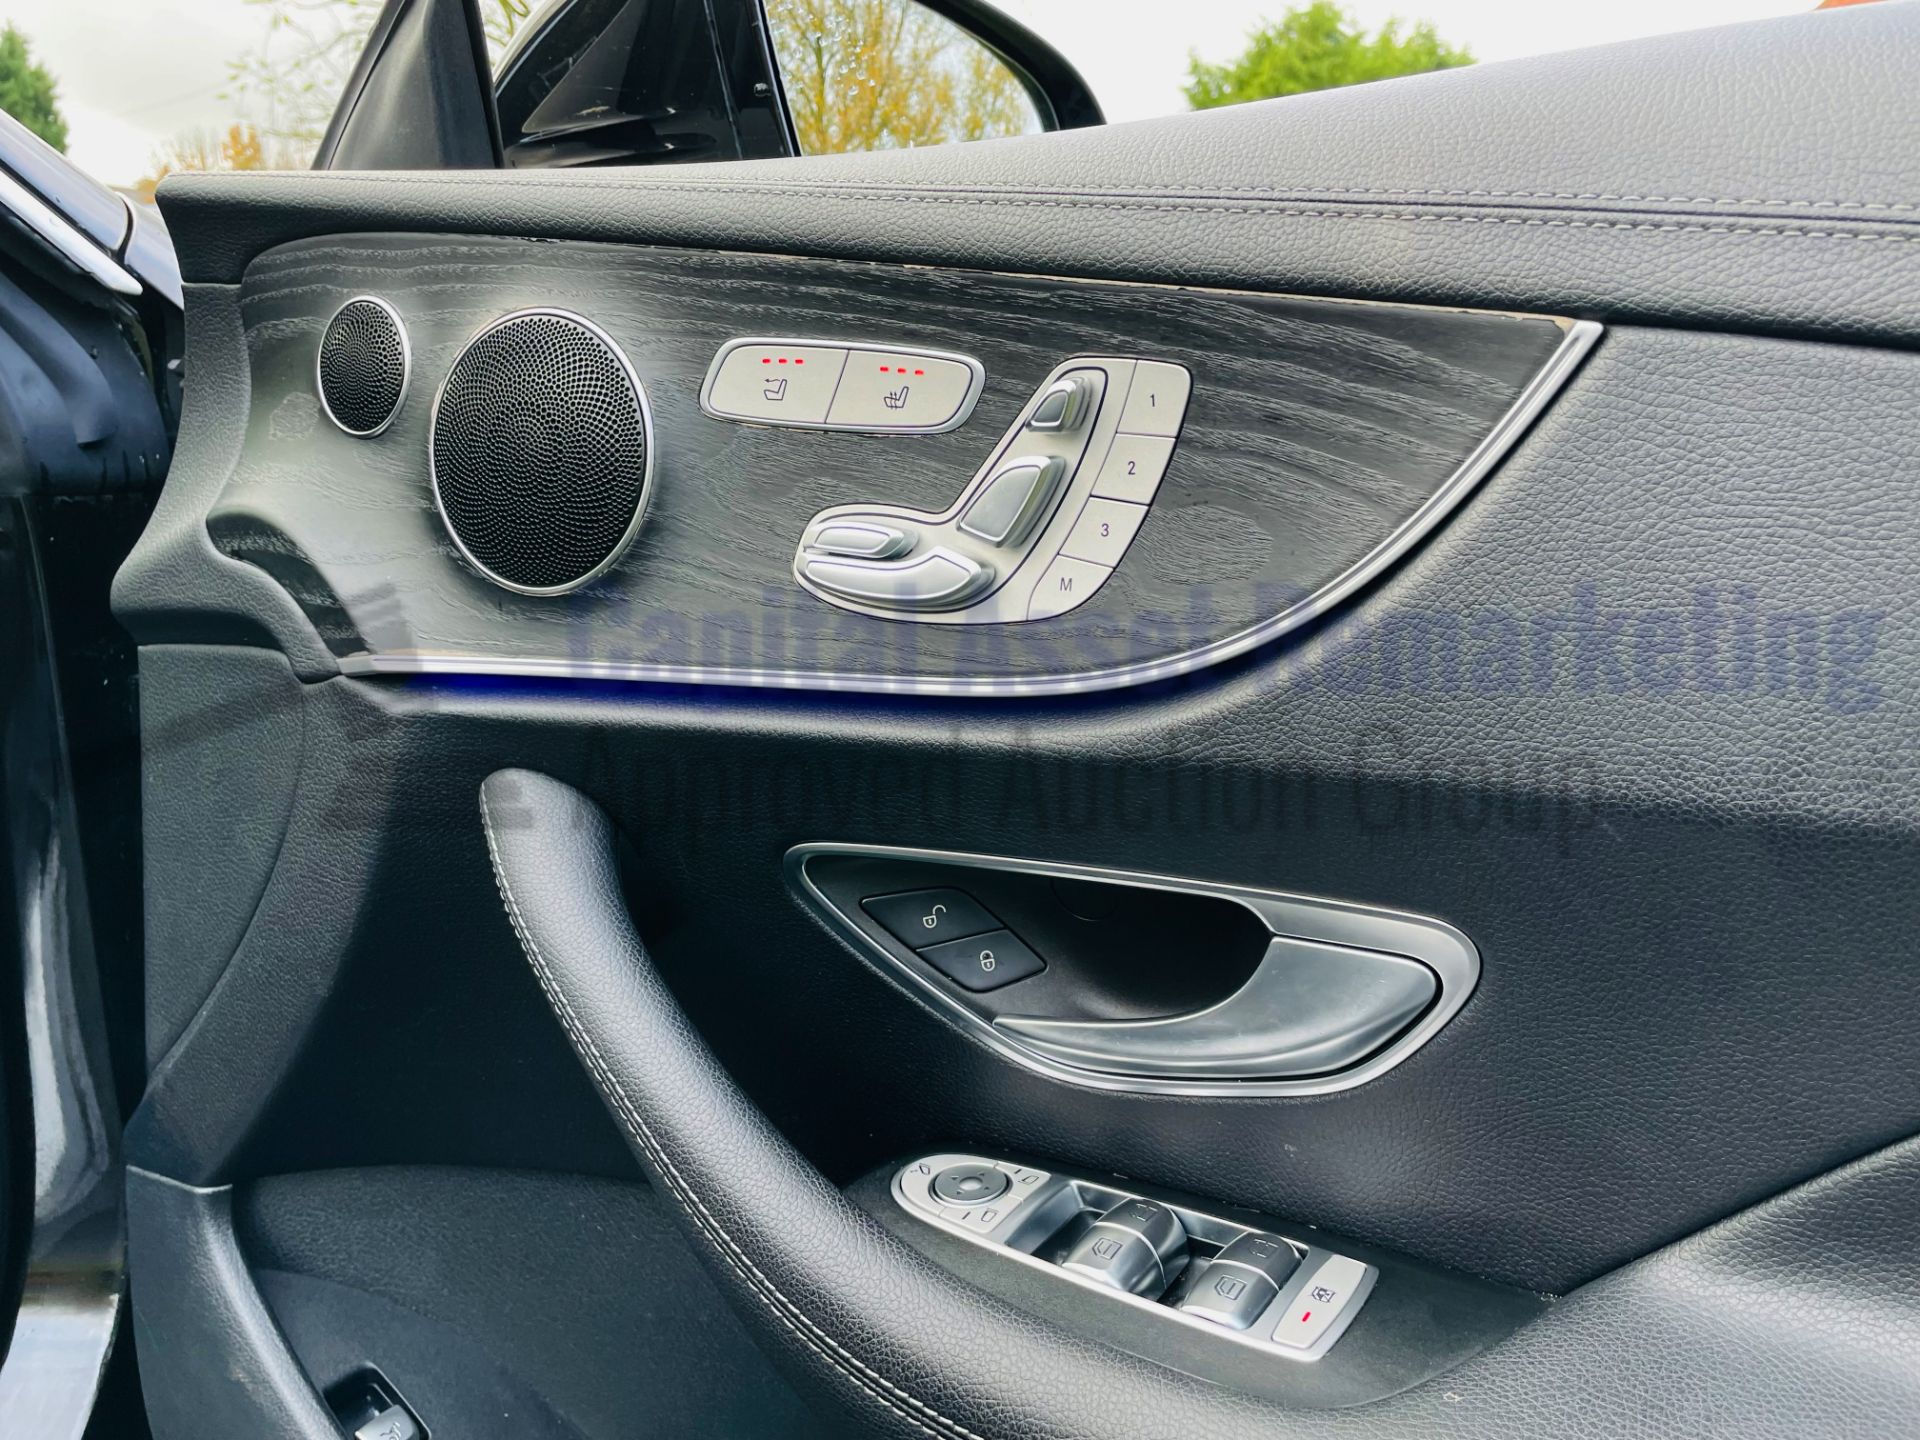 MERCEDES-BENZ E220D *AMG LINE - CABRIOLET* (2019 - EURO 6) '9G TRONIC AUTO - SAT NAV' *FULLY LOADED* - Image 44 of 66